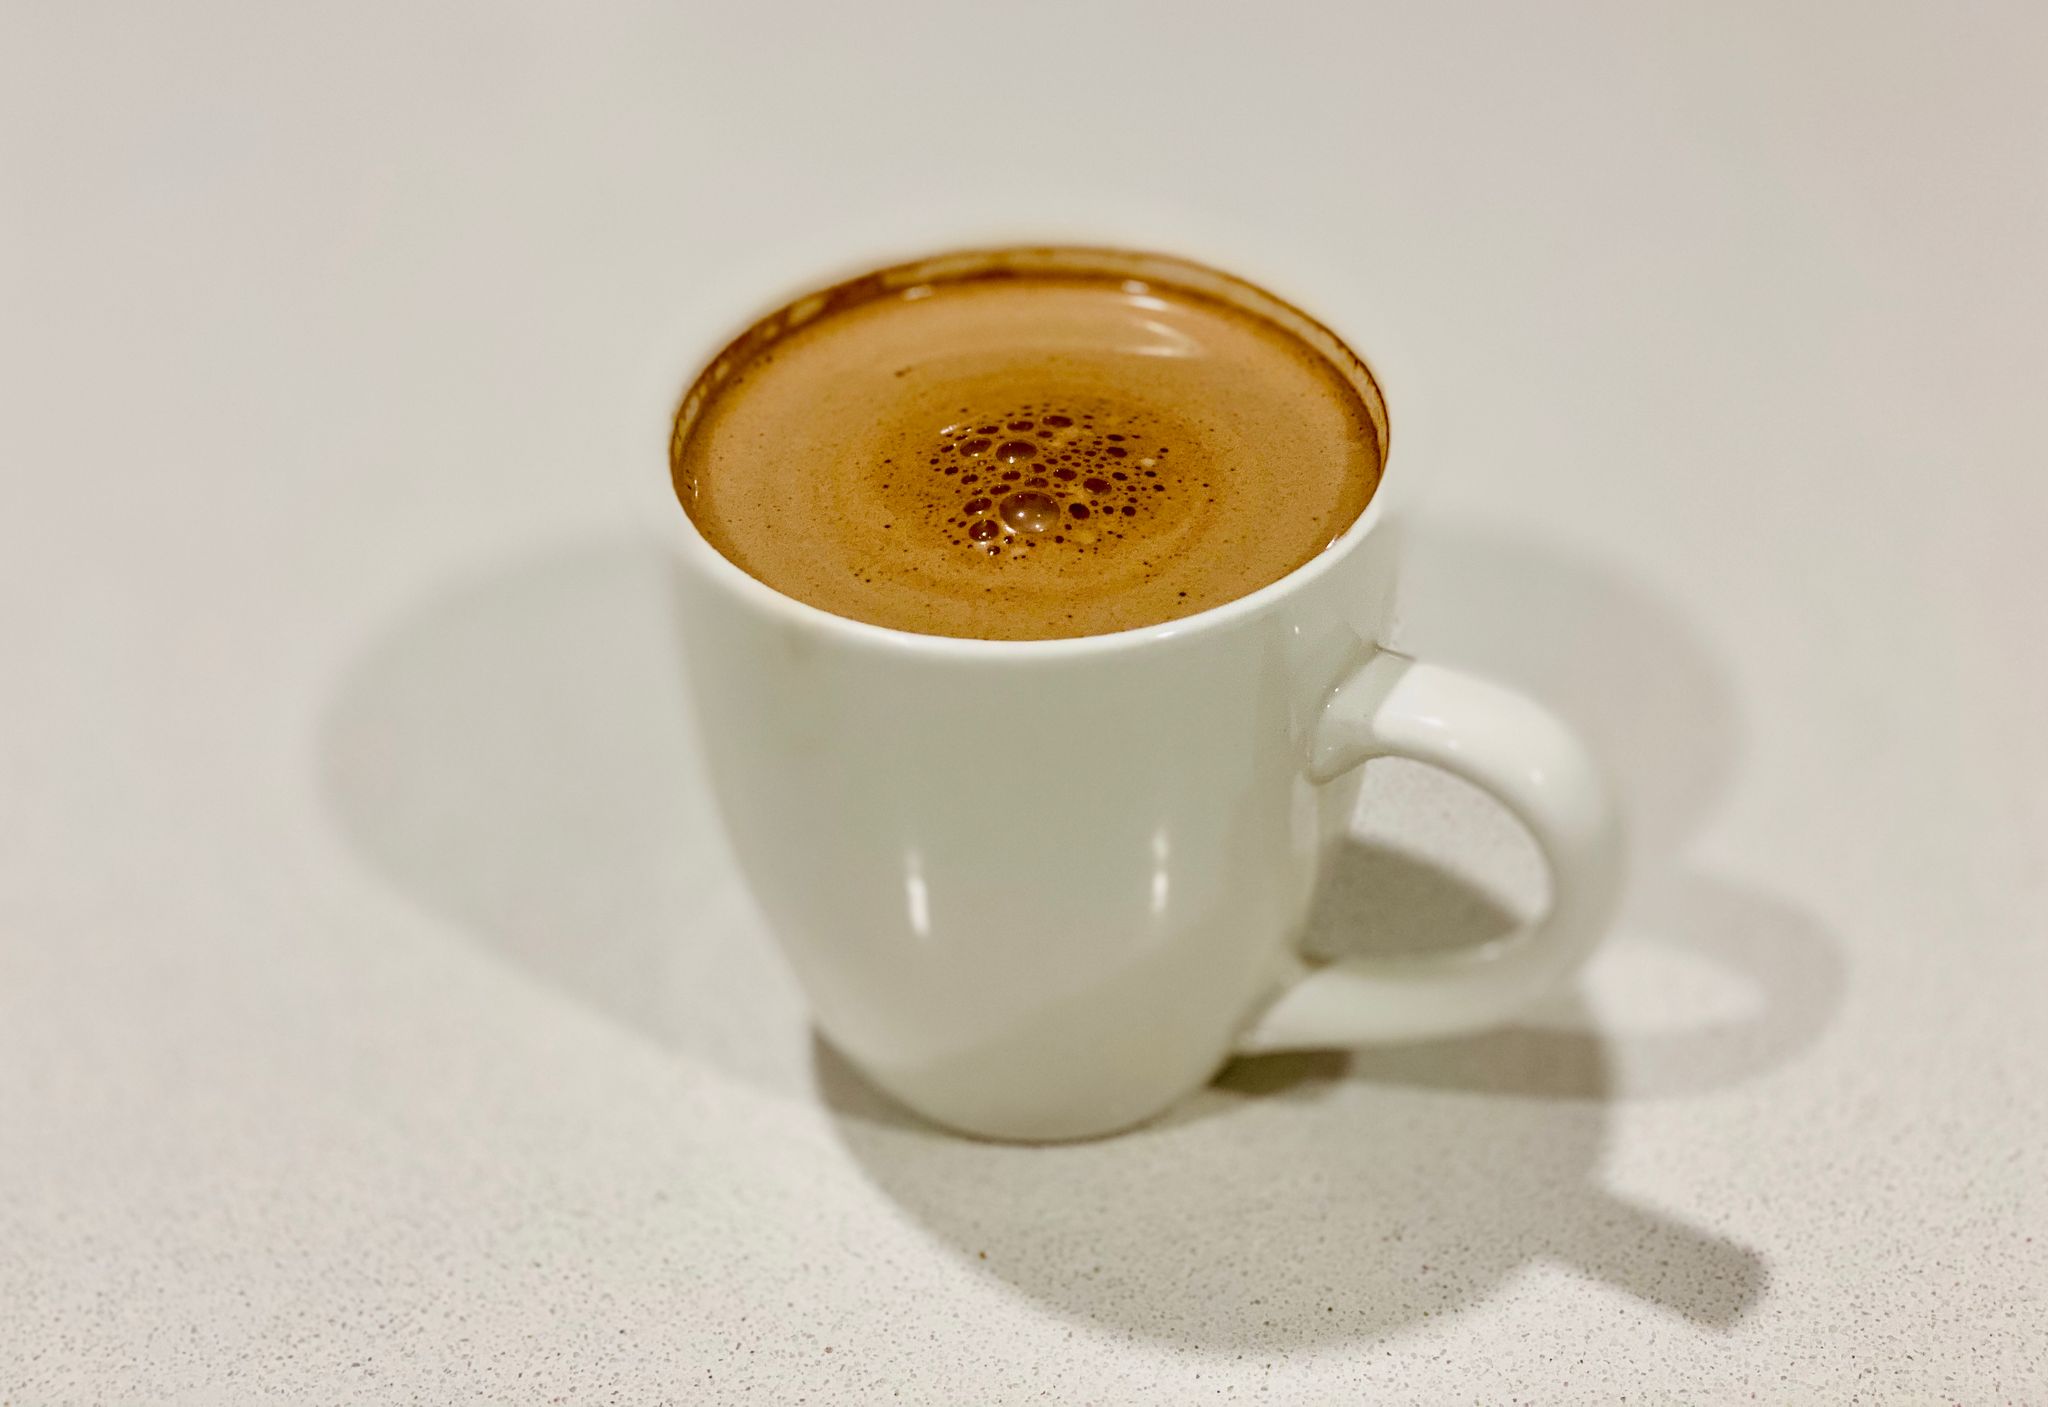 A photo of a white mug with hot chocolate in it.